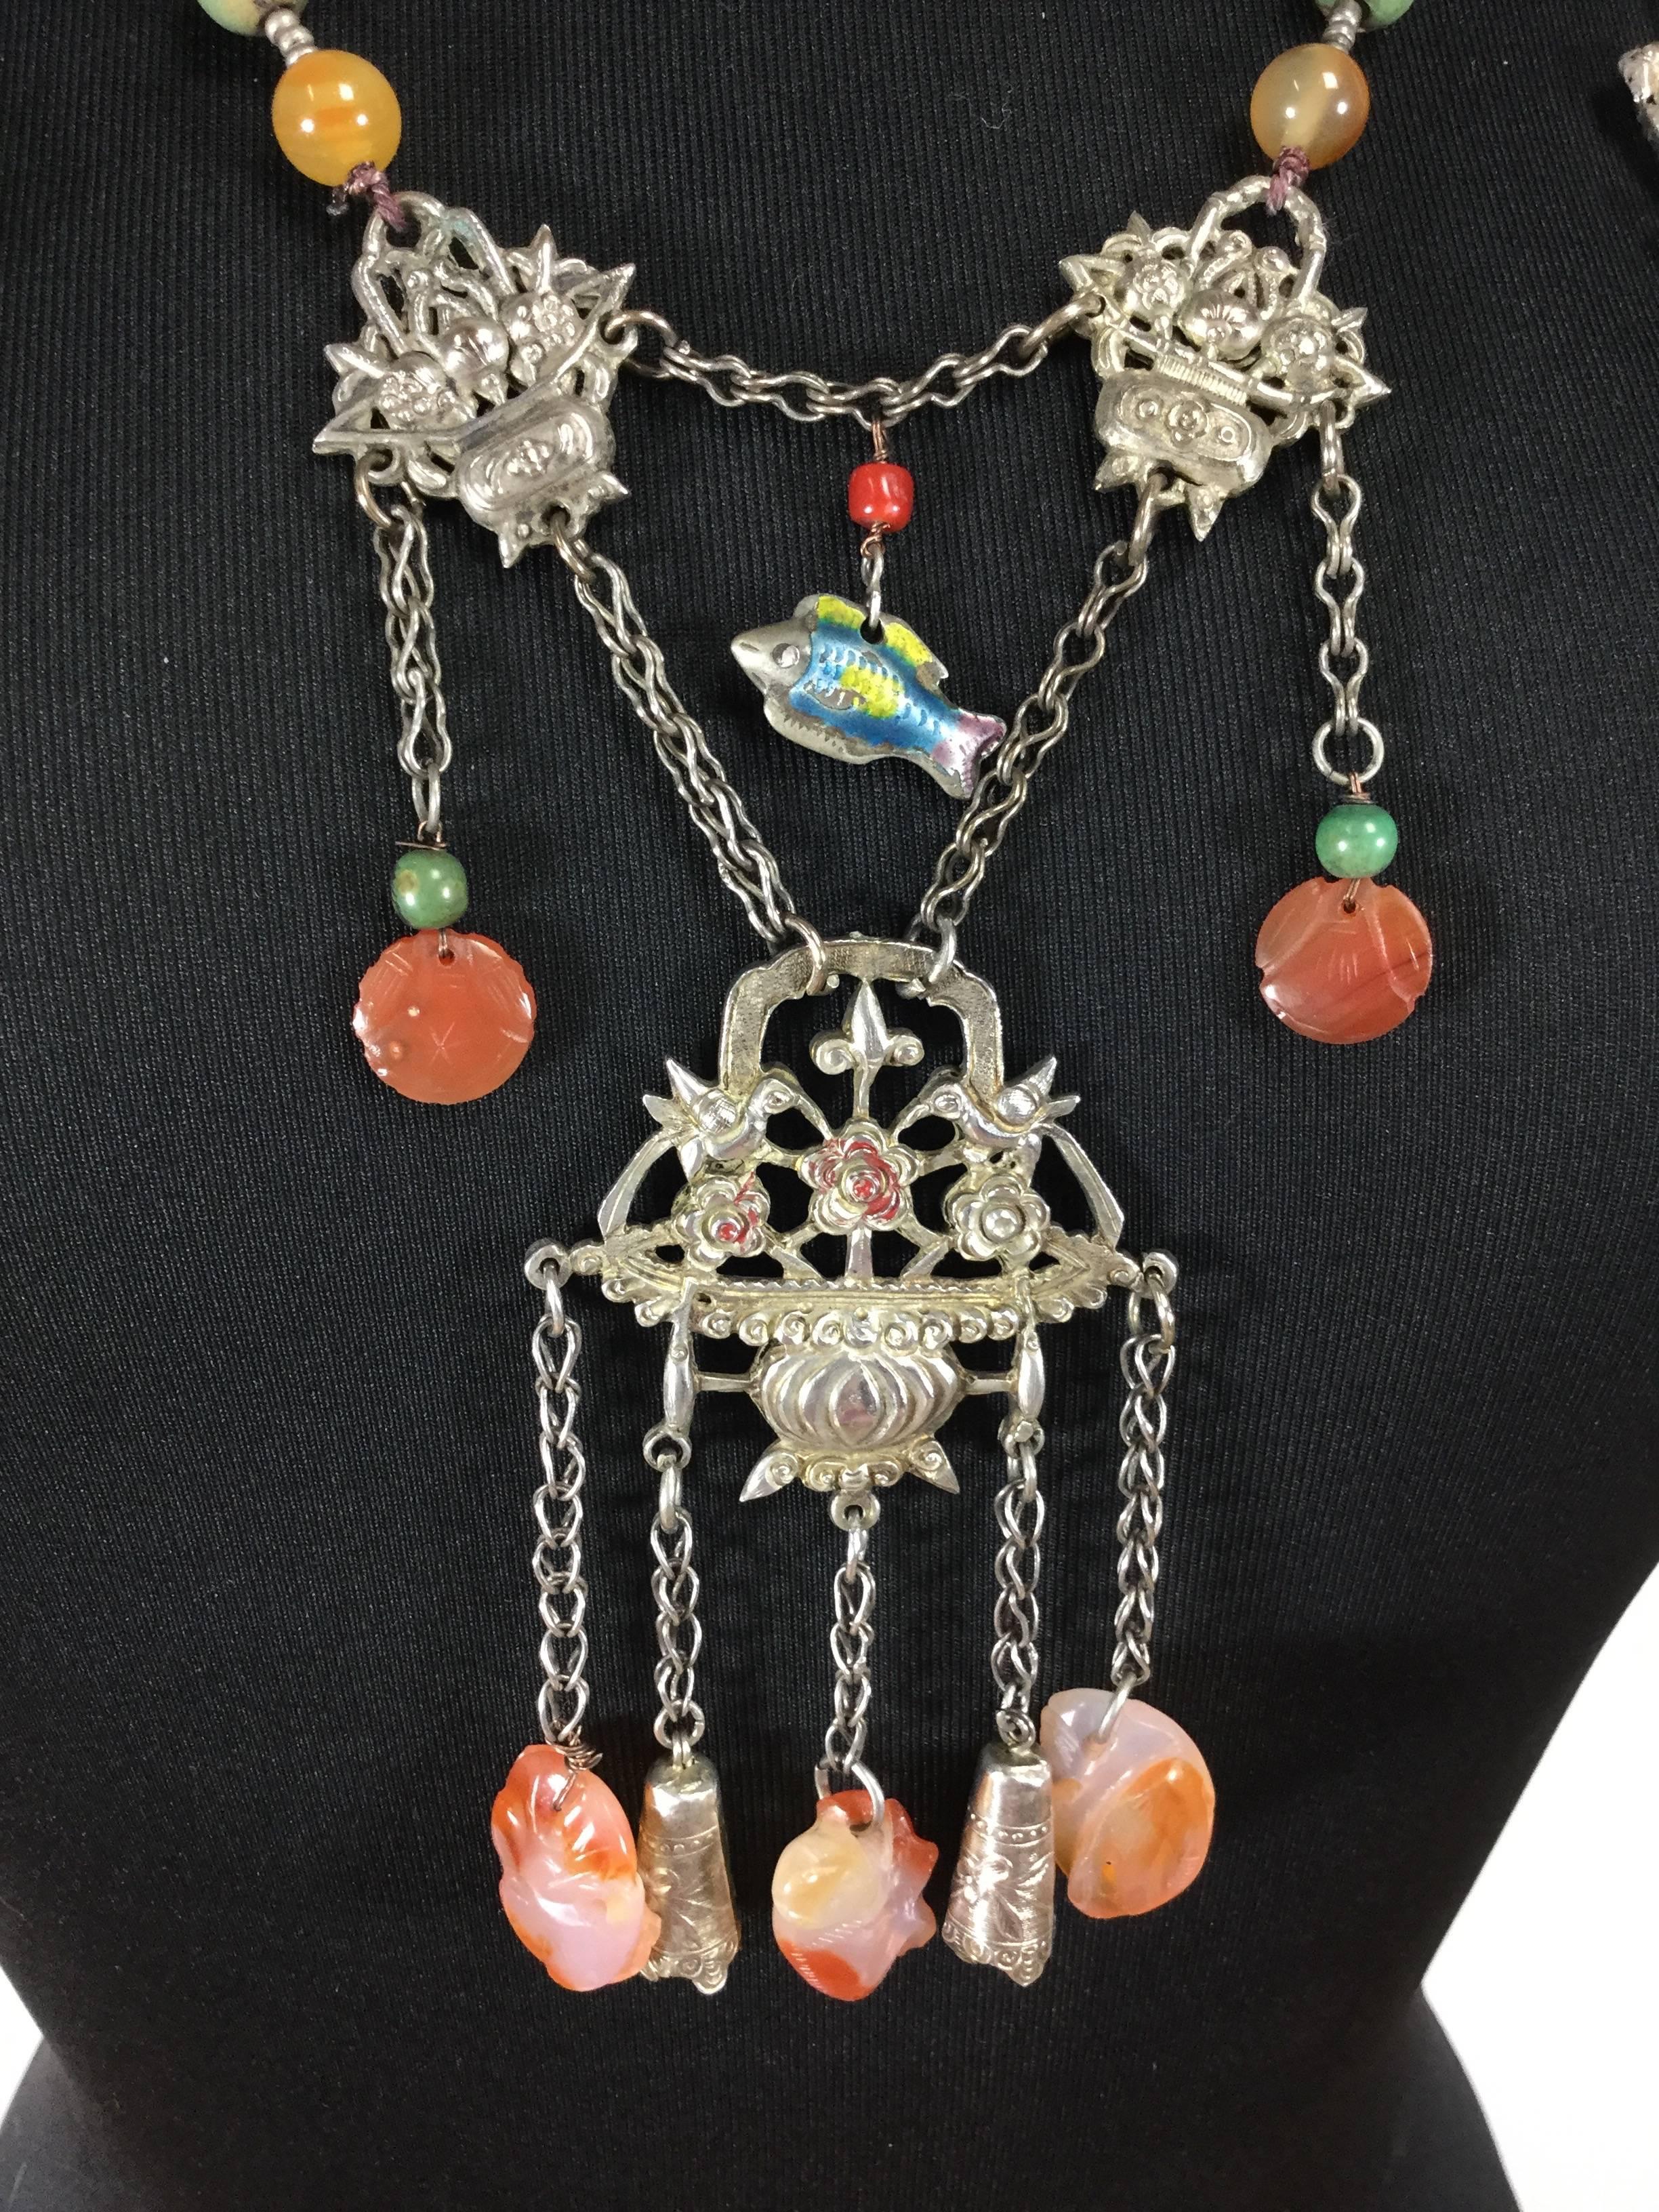 This majestic antique Mandarin court necklace features a rich collection of charms from the Chinese Qing Dynasty which dated from 1644 to 1912.  There is a finely detailed foo dog which is a mythical creature who guards the temple. There is an